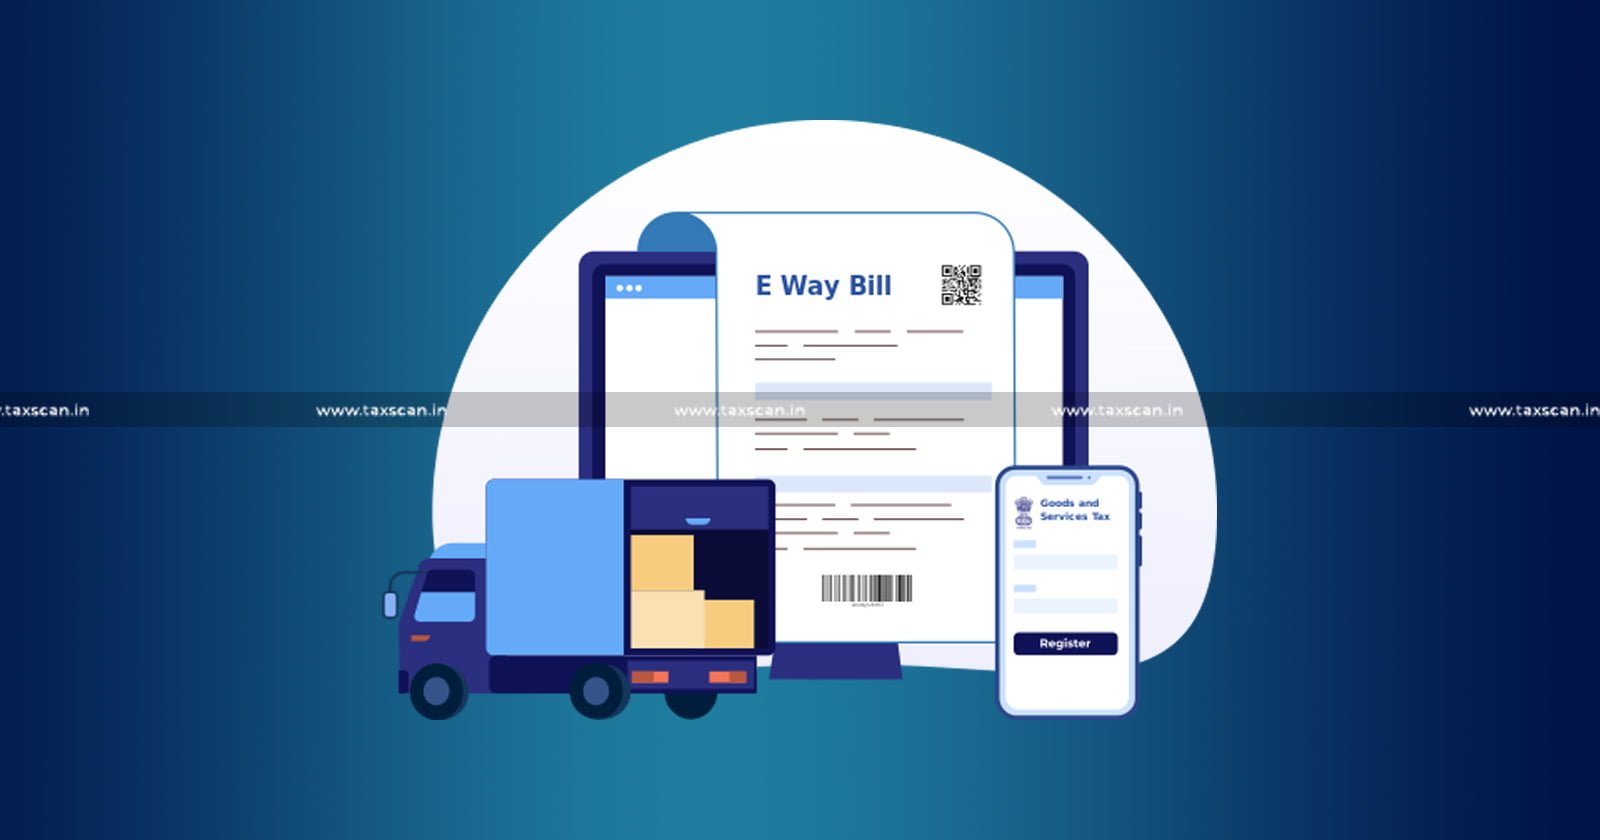 Law - Transporting Goods - Vehicle - Transporting Goods in a Vehicle - Proper E-Way Bill - E-Way Bill - Calcutta High Court - Taxscan